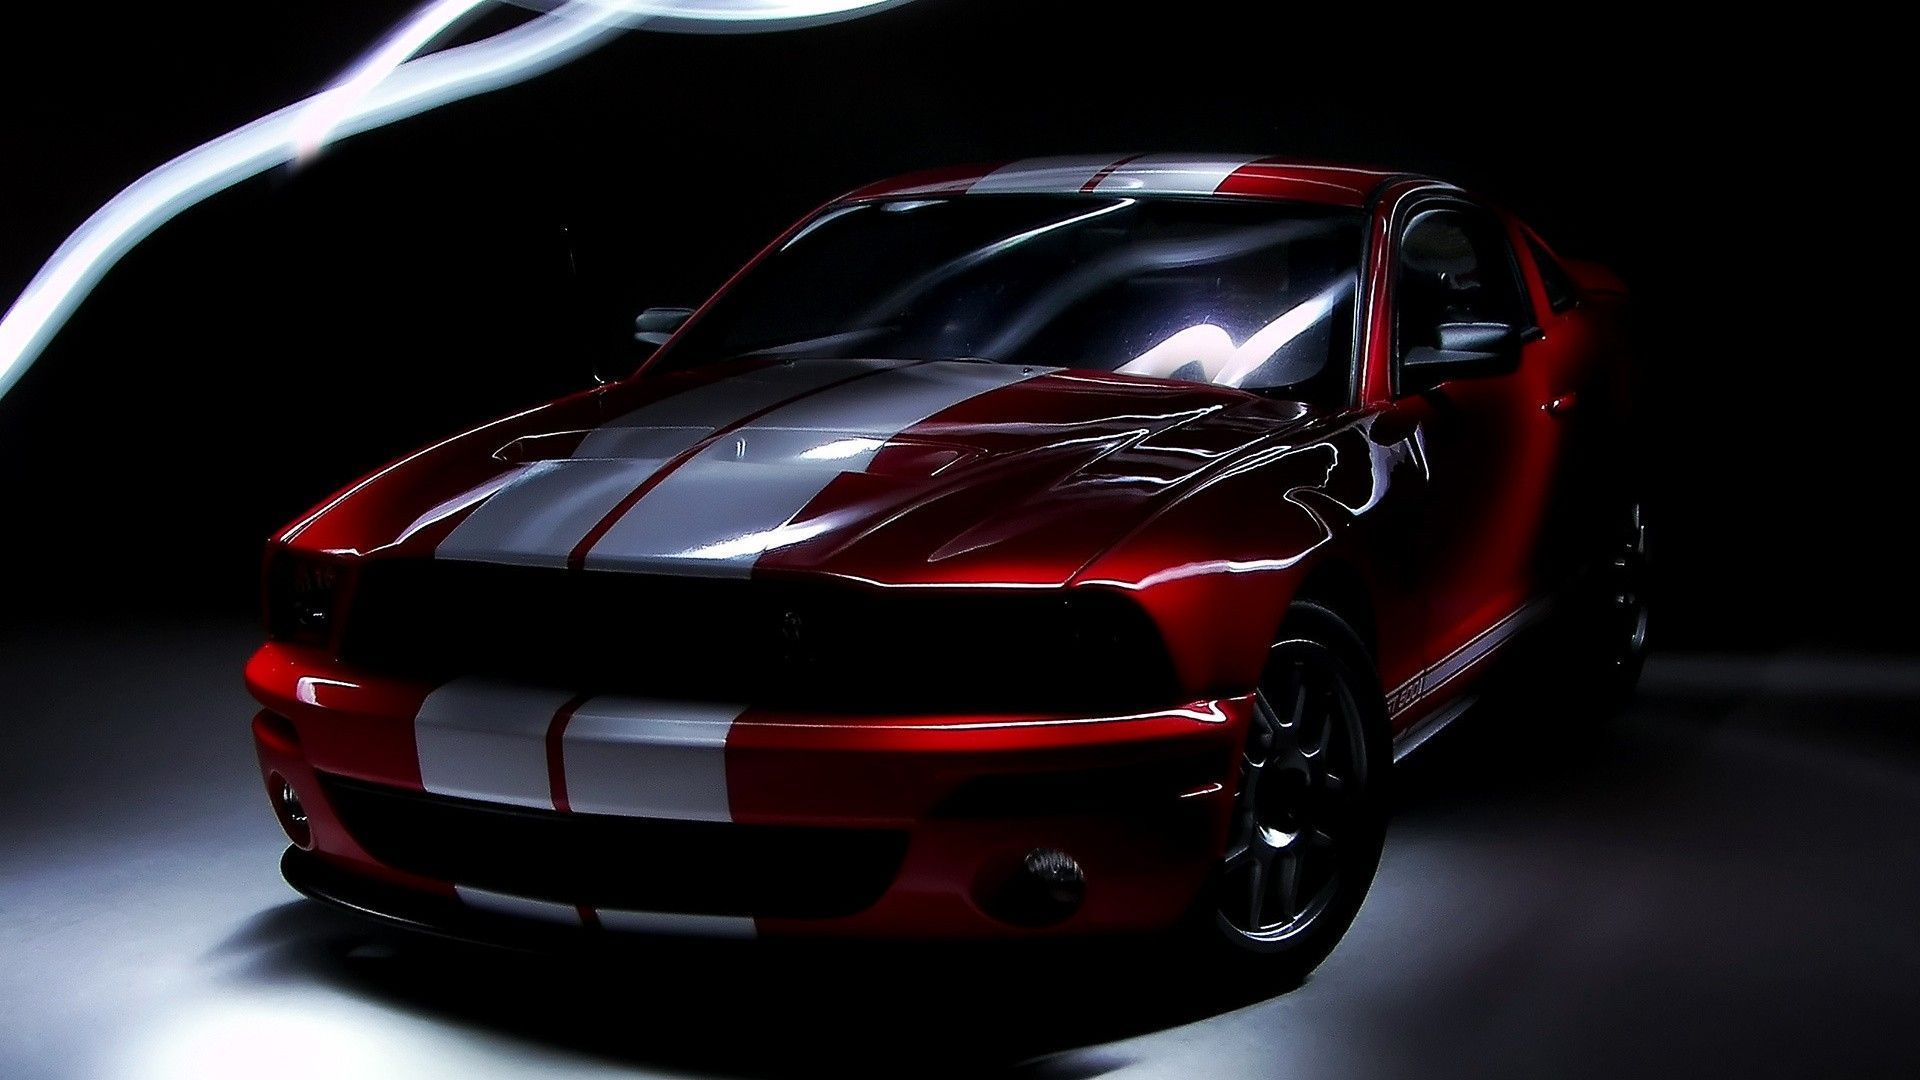 Super Ford Mustang Shelby Wallpaper | Full HD Pictures